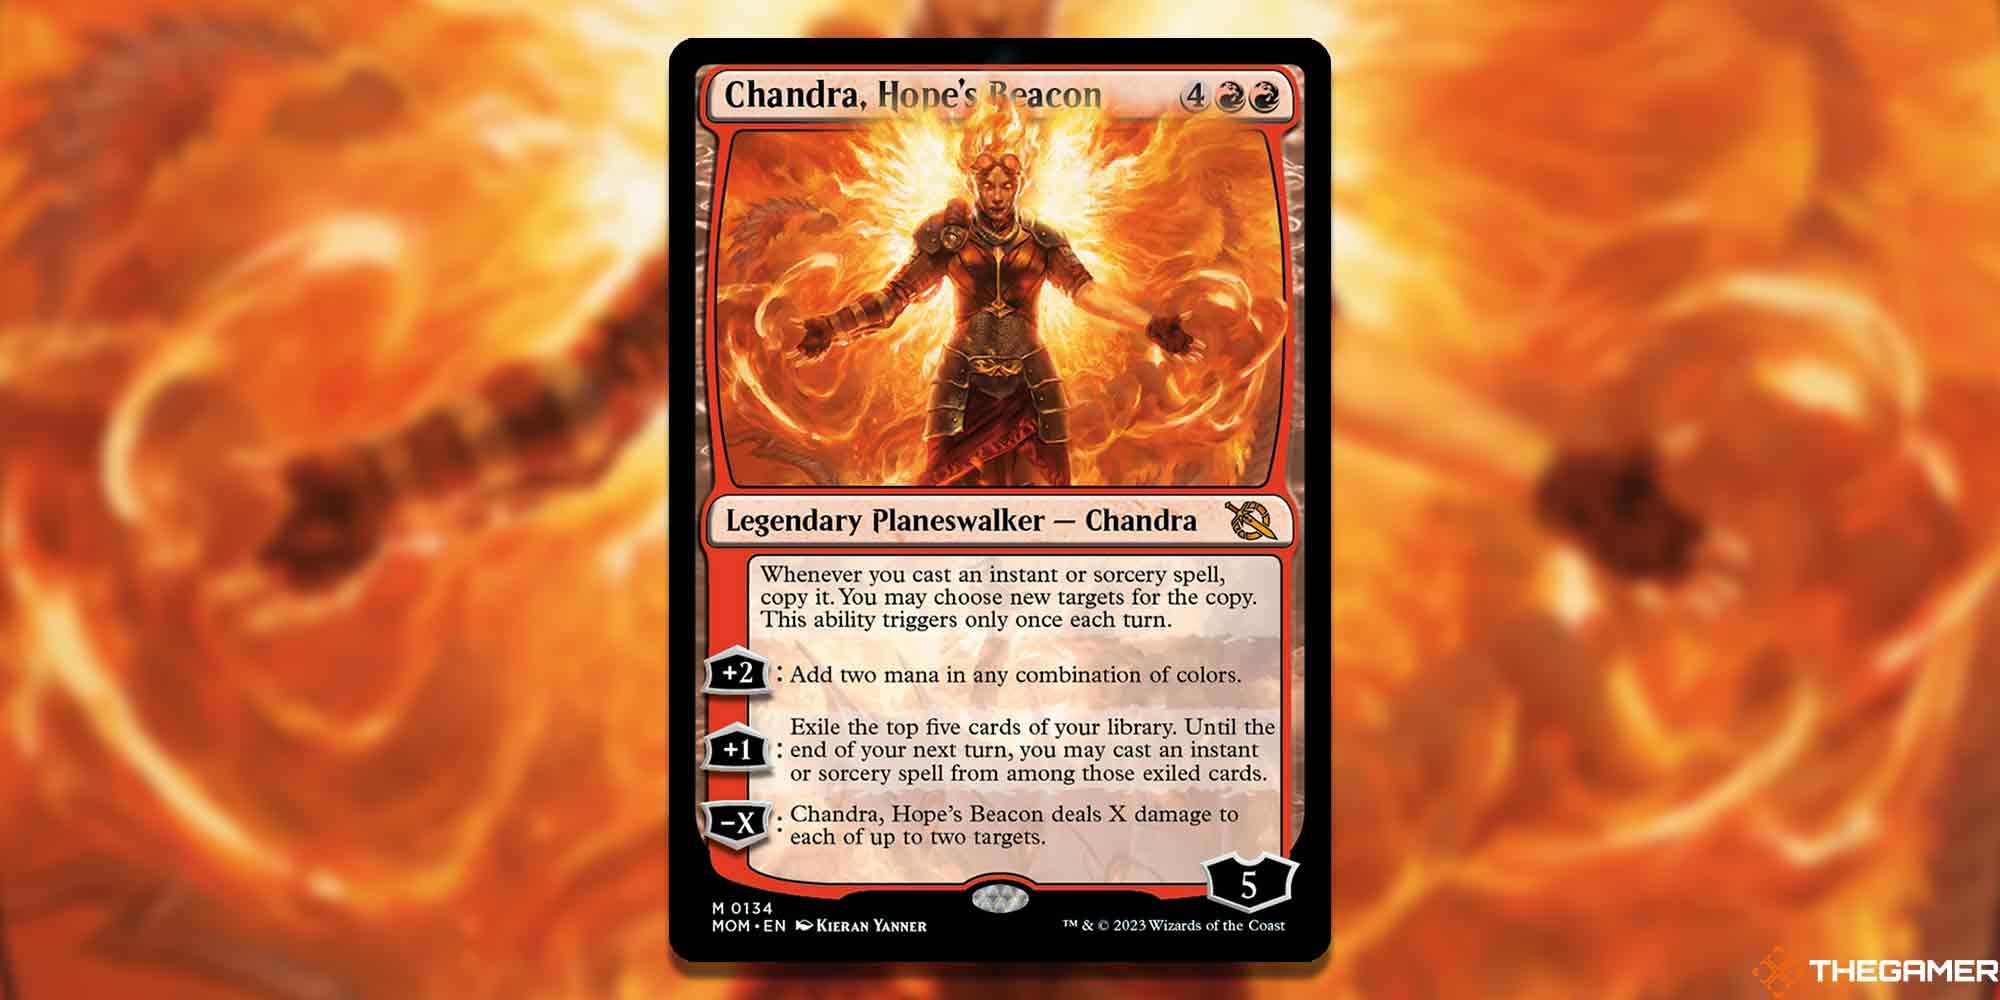 Chandra, Hope's Beacon cards and art backgrounds from Magic The Gathering.